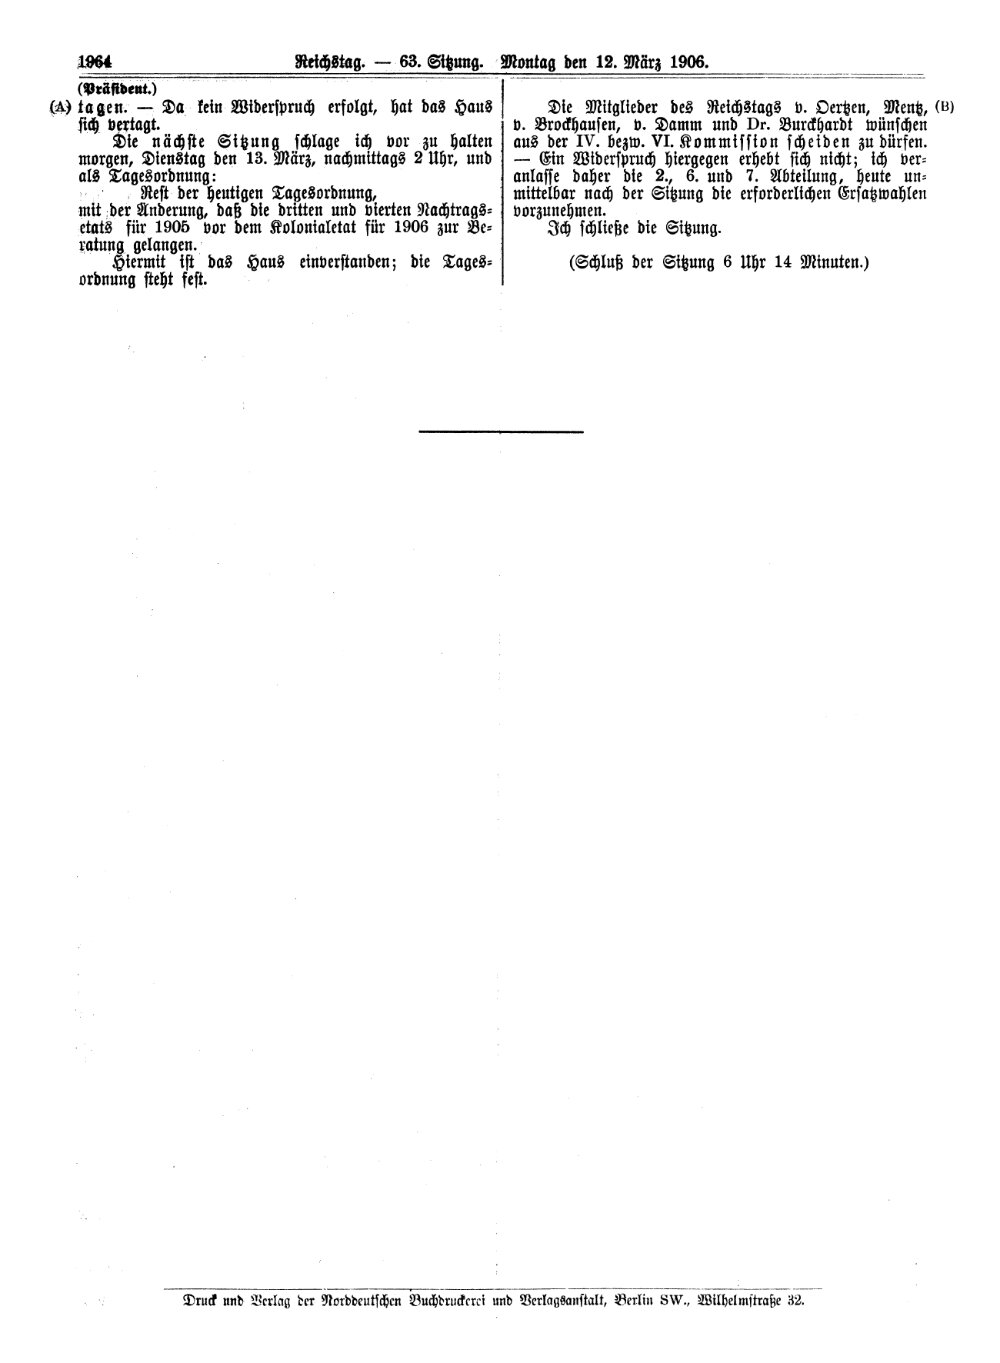 Scan of page 1964